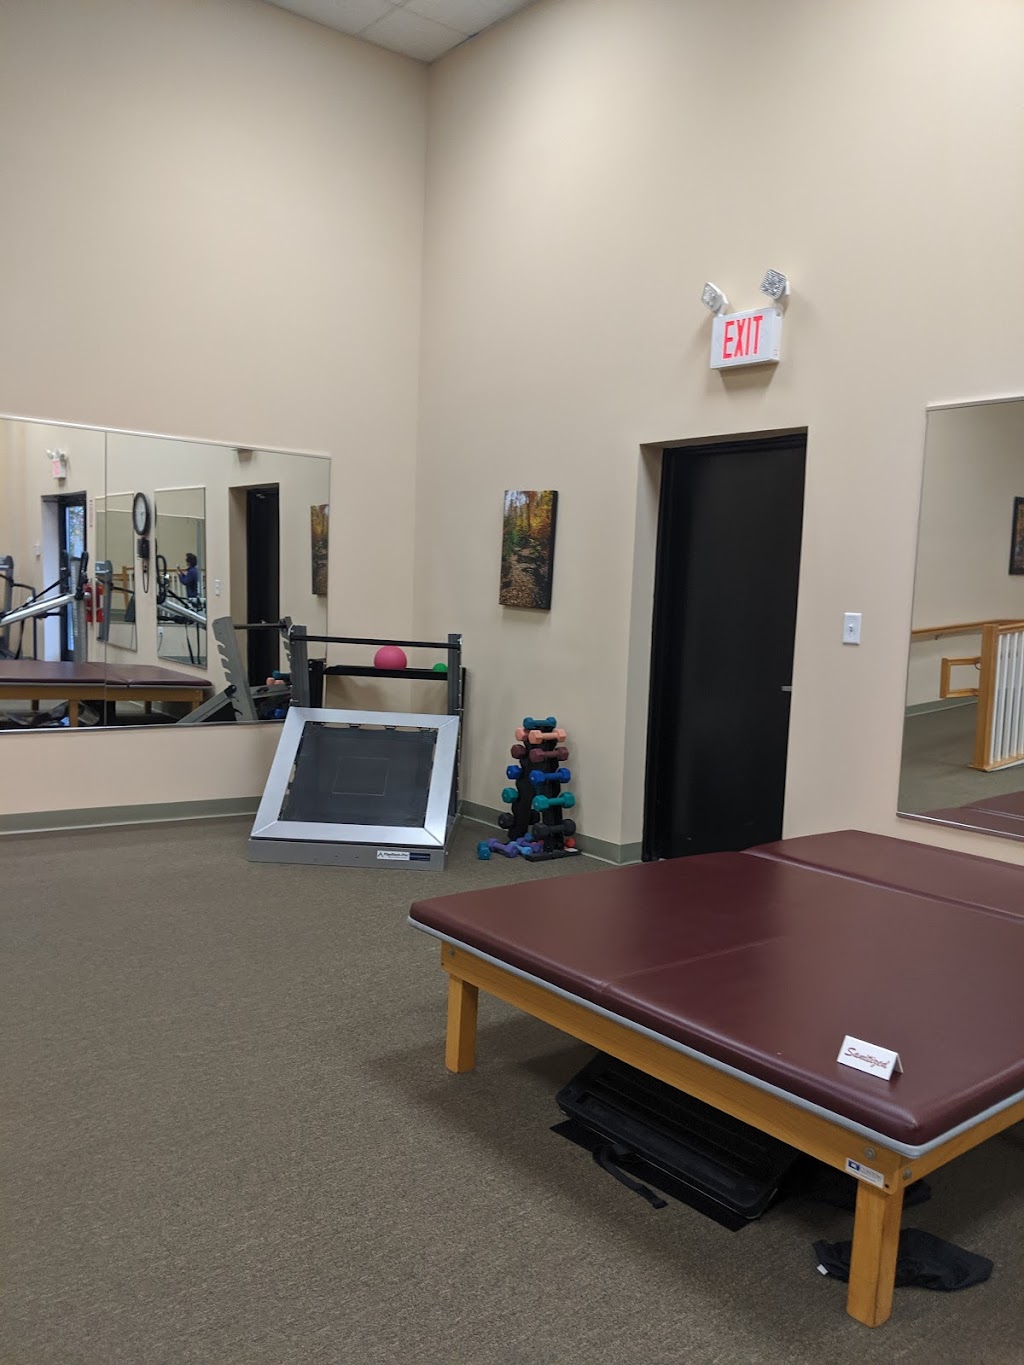 Ivy Rehab Physical Therapy | 3440 US-9, Freehold, NJ 07728, USA | Phone: (732) 431-4222